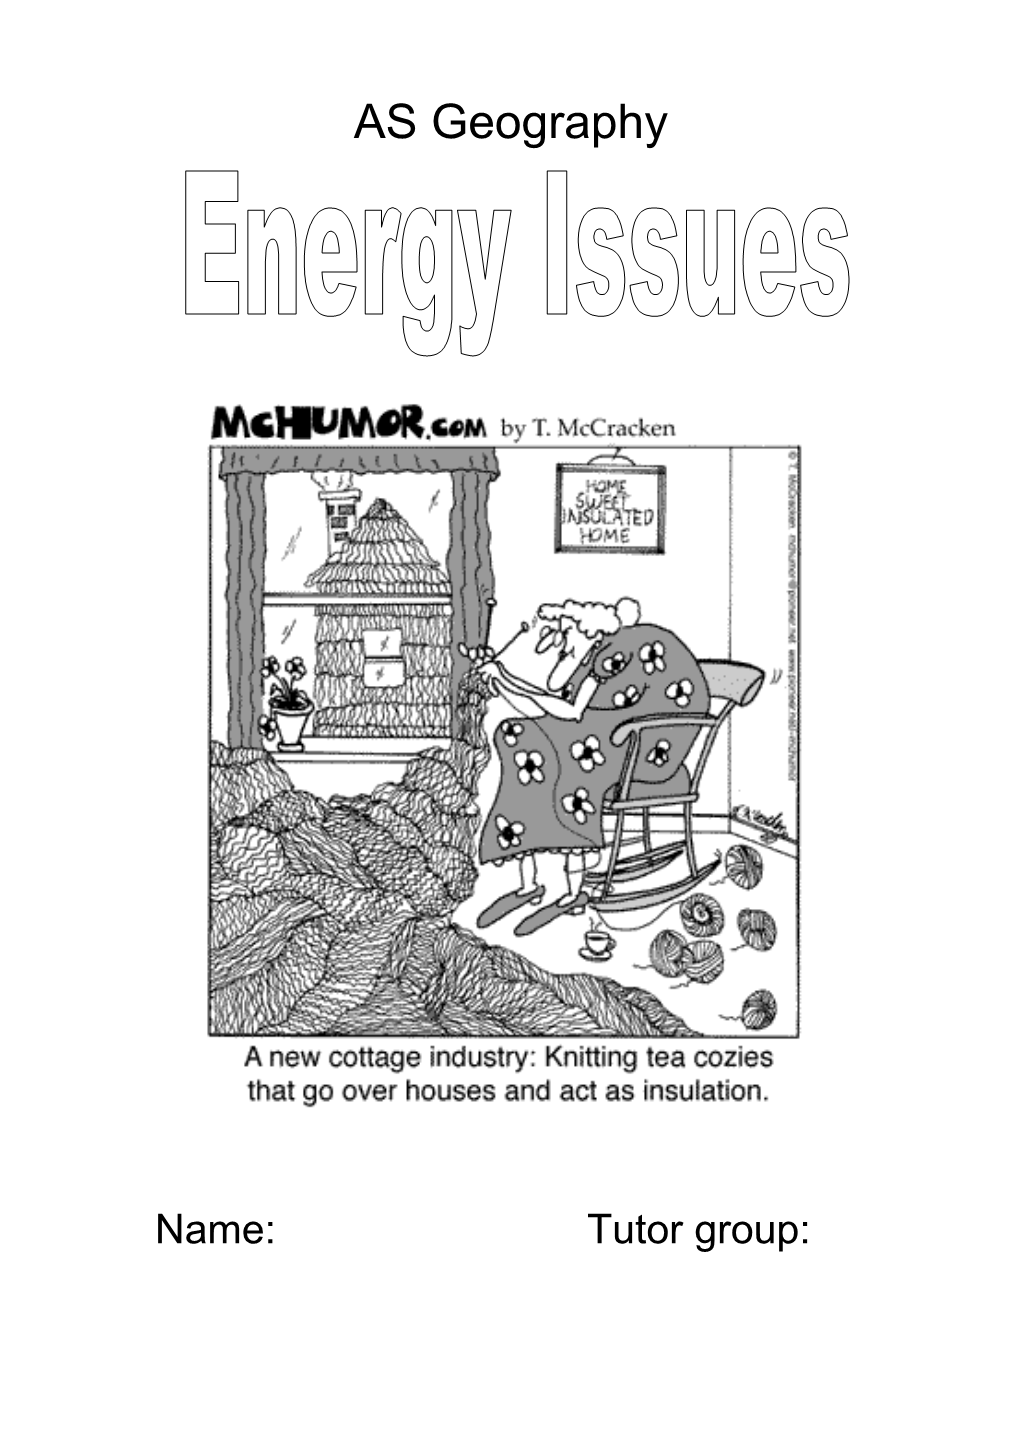 How Can We Classify Energy Sources?